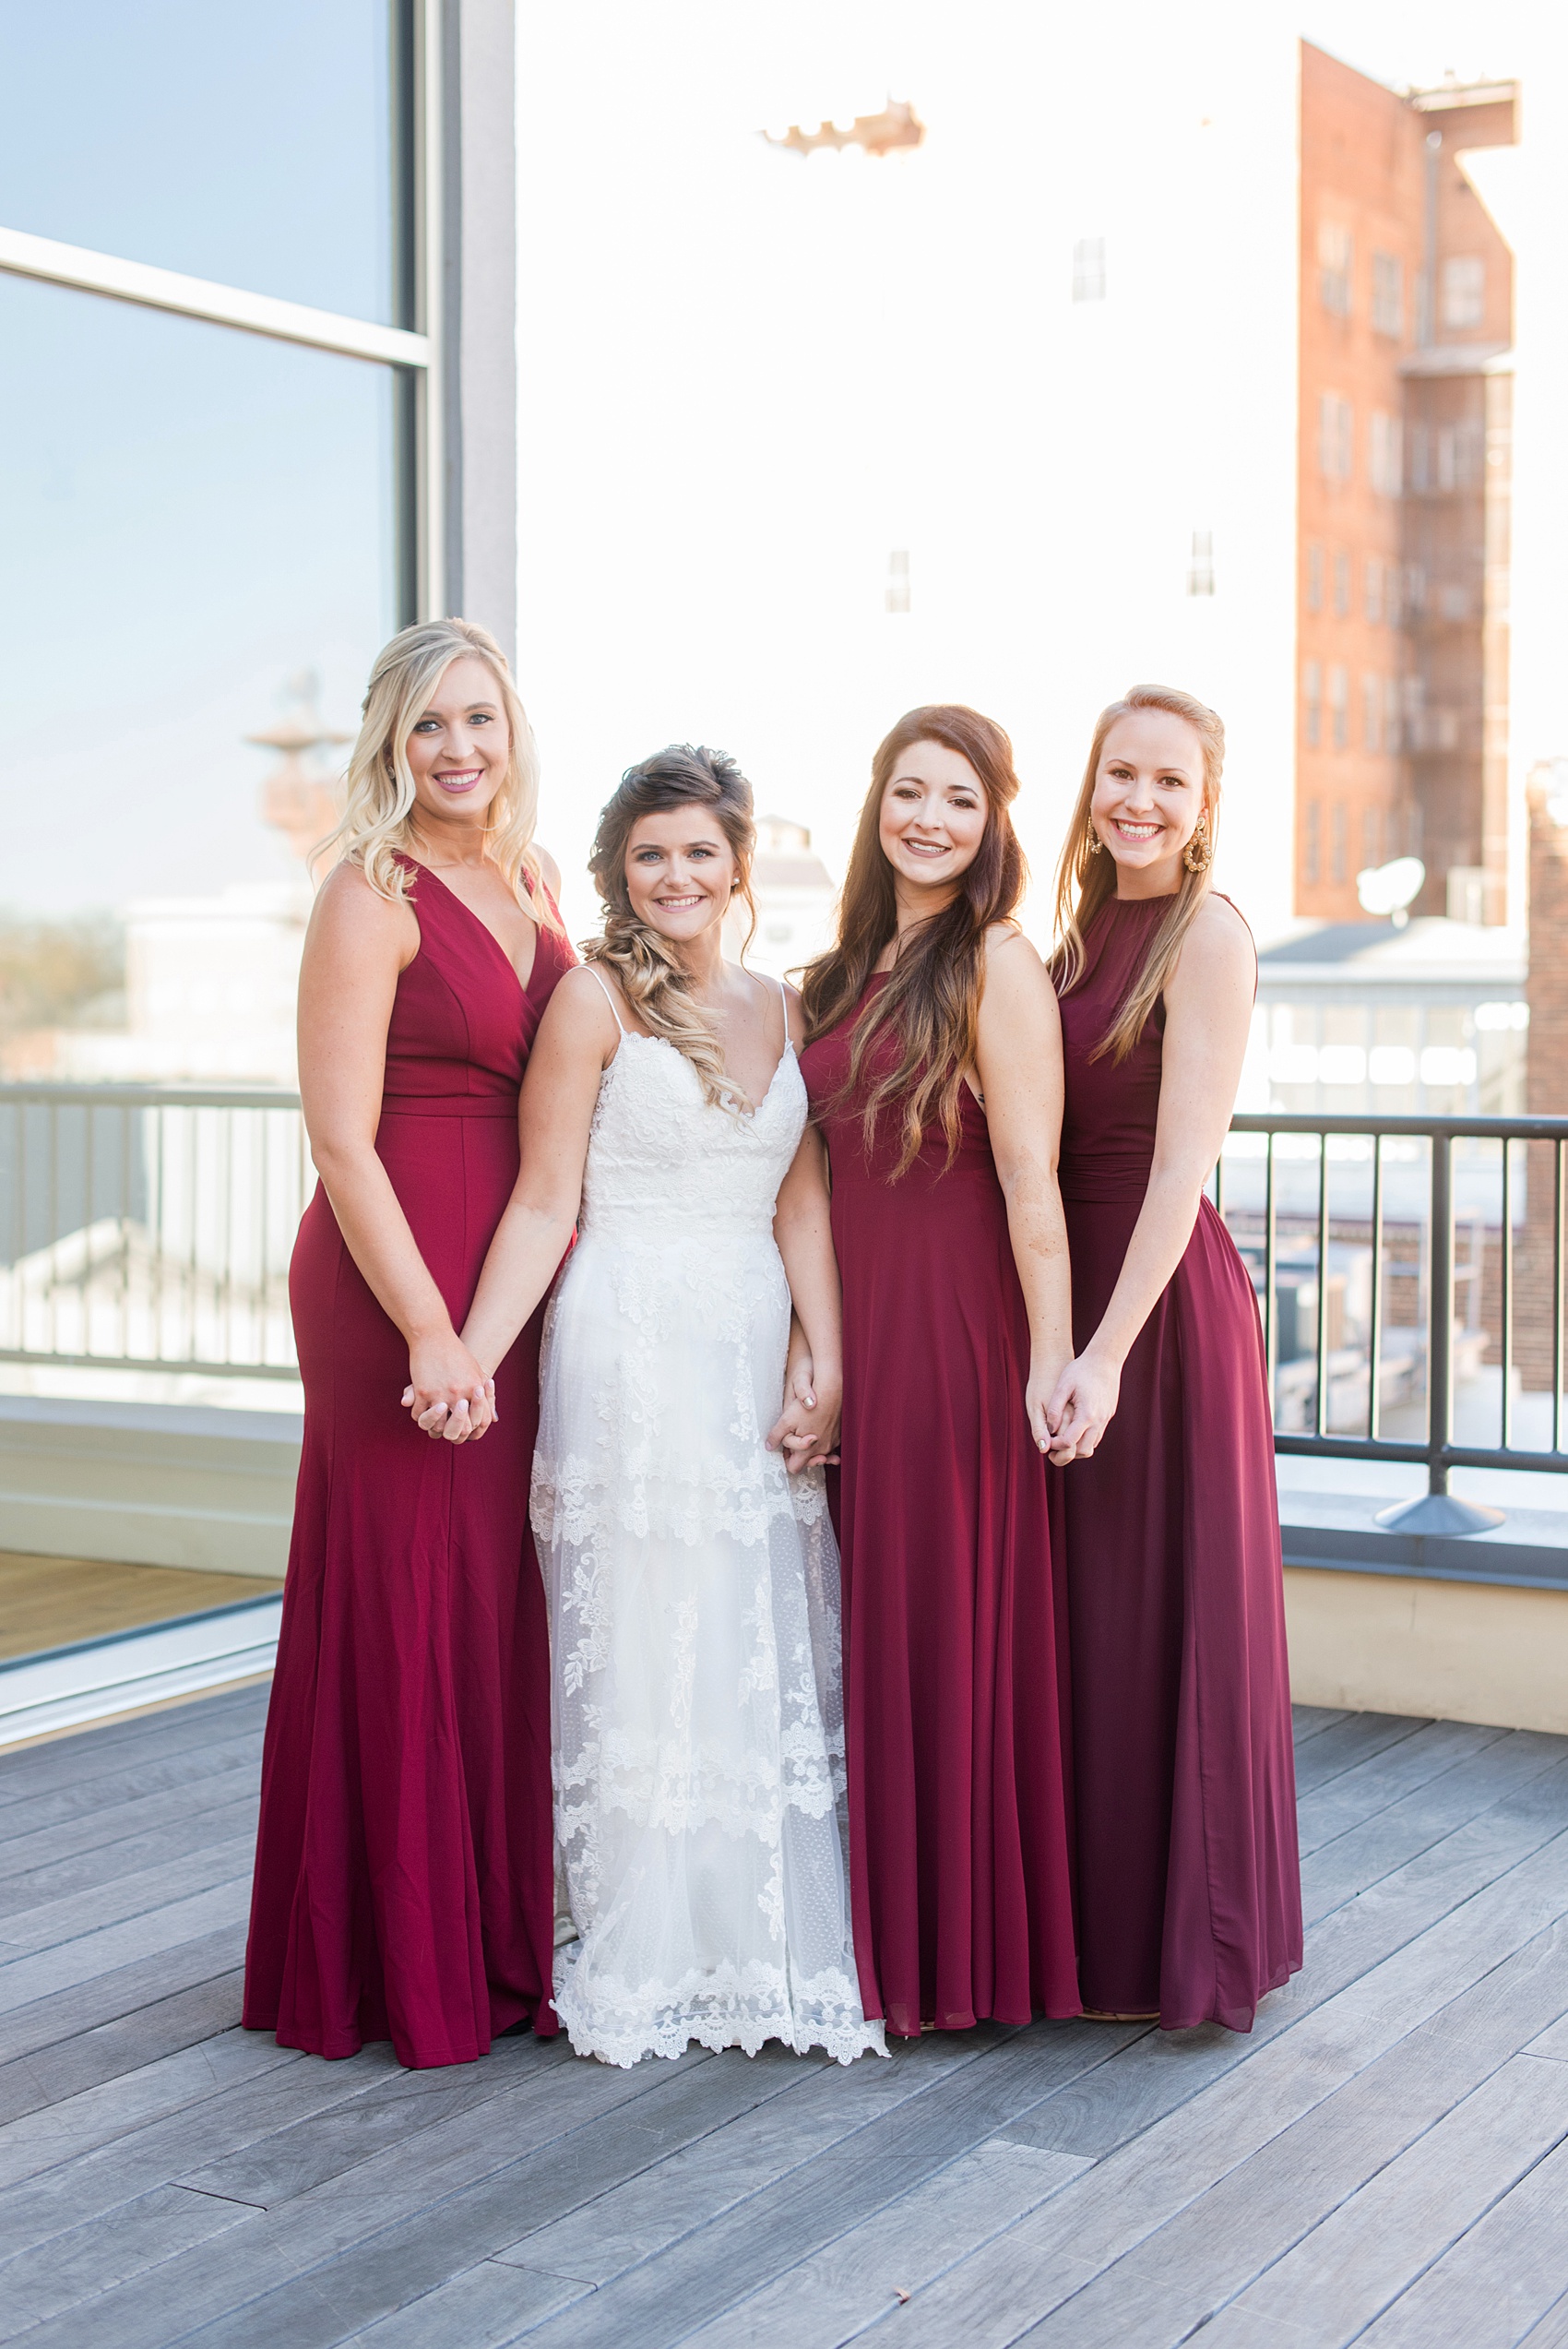 Pictures from a Christmas inspired wedding in downtown Raleigh, North Carolina by Mikkel Paige Photography. The bridesmaids got ready at The Glass Box and some wore burgundy gowns. Click through to see the entire style with others in pink mismatched gowns from a beautiful celebration, including decor photos in a green and gold decor palette for their reception at The Stockroom at 230. #mikkelpaige #raleighweddingphotographer #downtownRaleigh #bridalparty #burgundybridesmaids